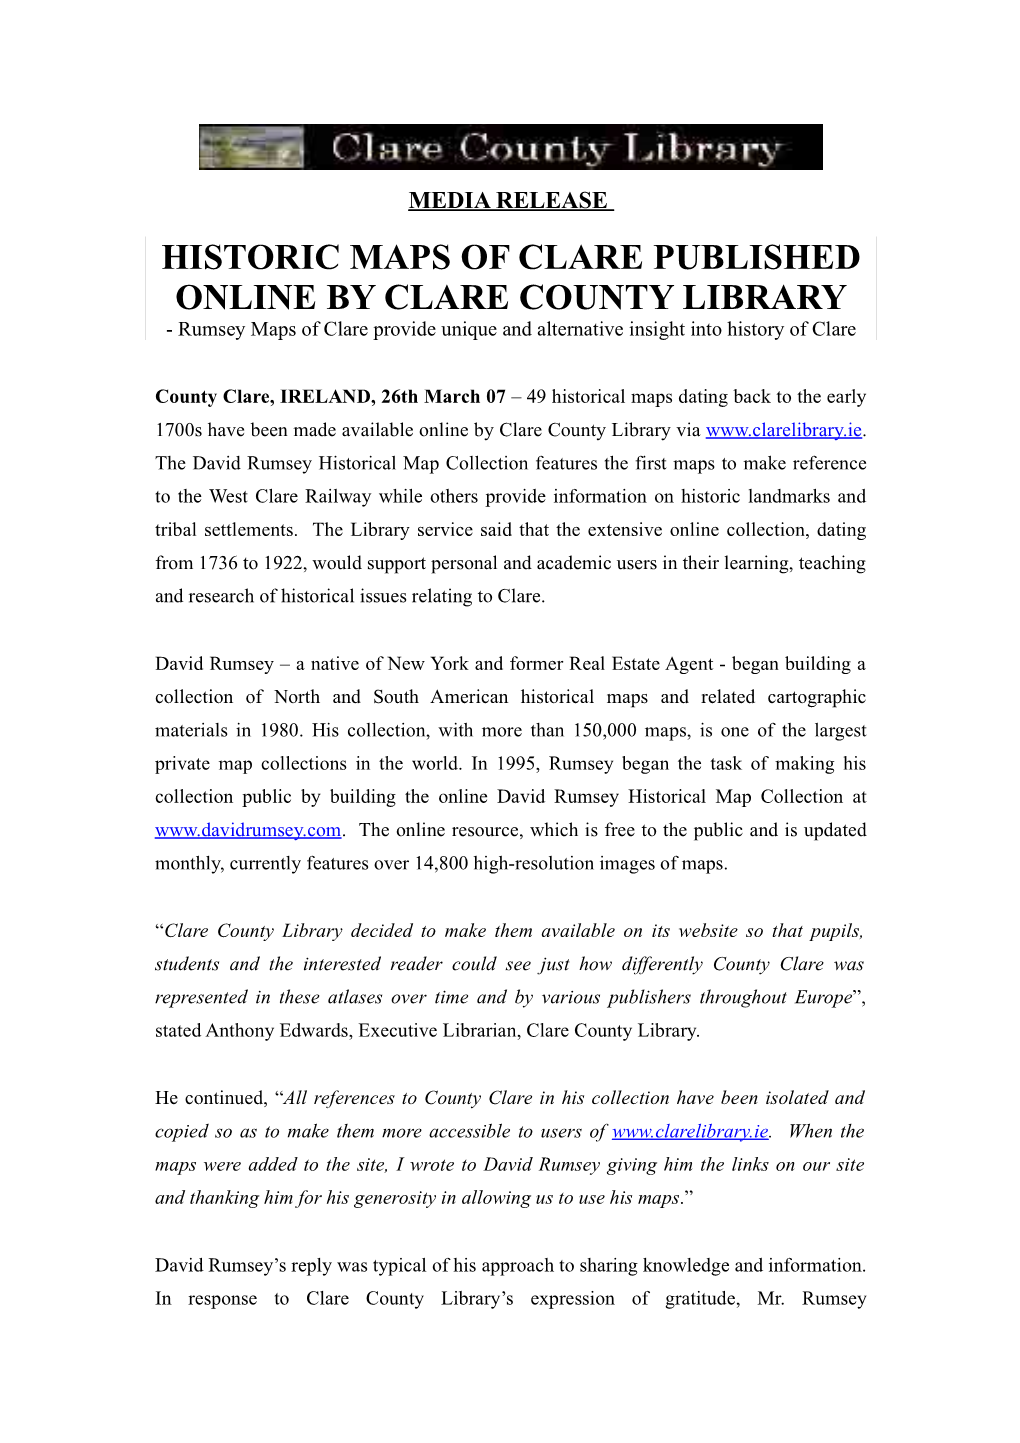 HISTORIC MAPS of CLARE PUBLISHED ONLINE by CLARE COUNTY LIBRARY - Rumsey Maps of Clare Provide Unique and Alternative Insight Into History of Clare